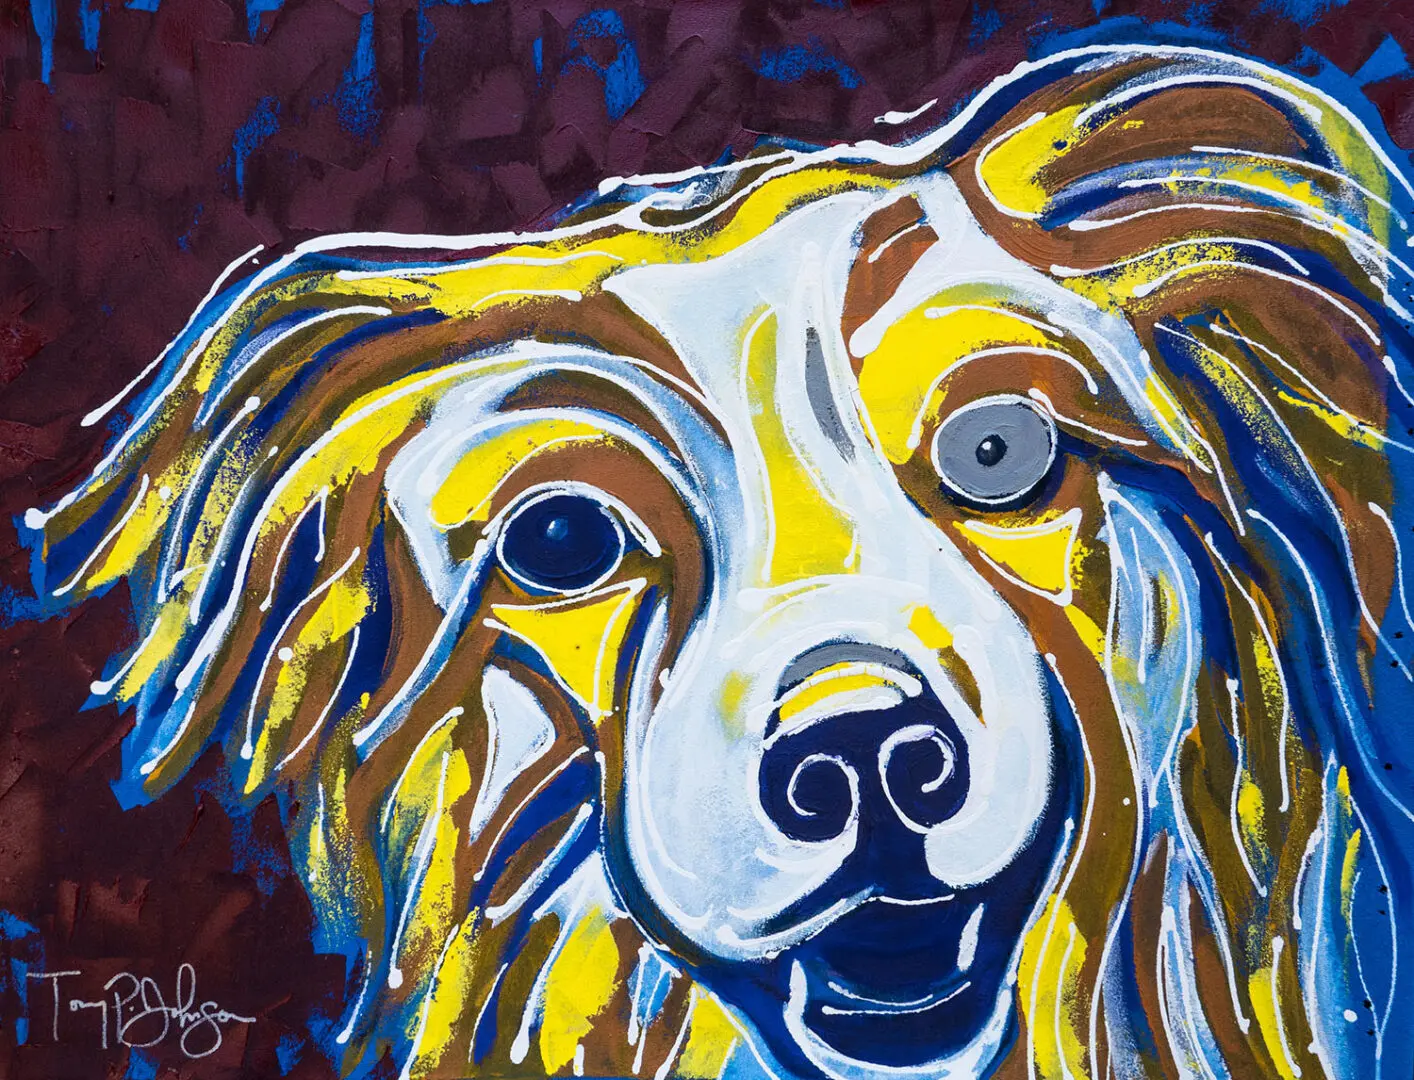 A painting of a dog with yellow and brown fur.